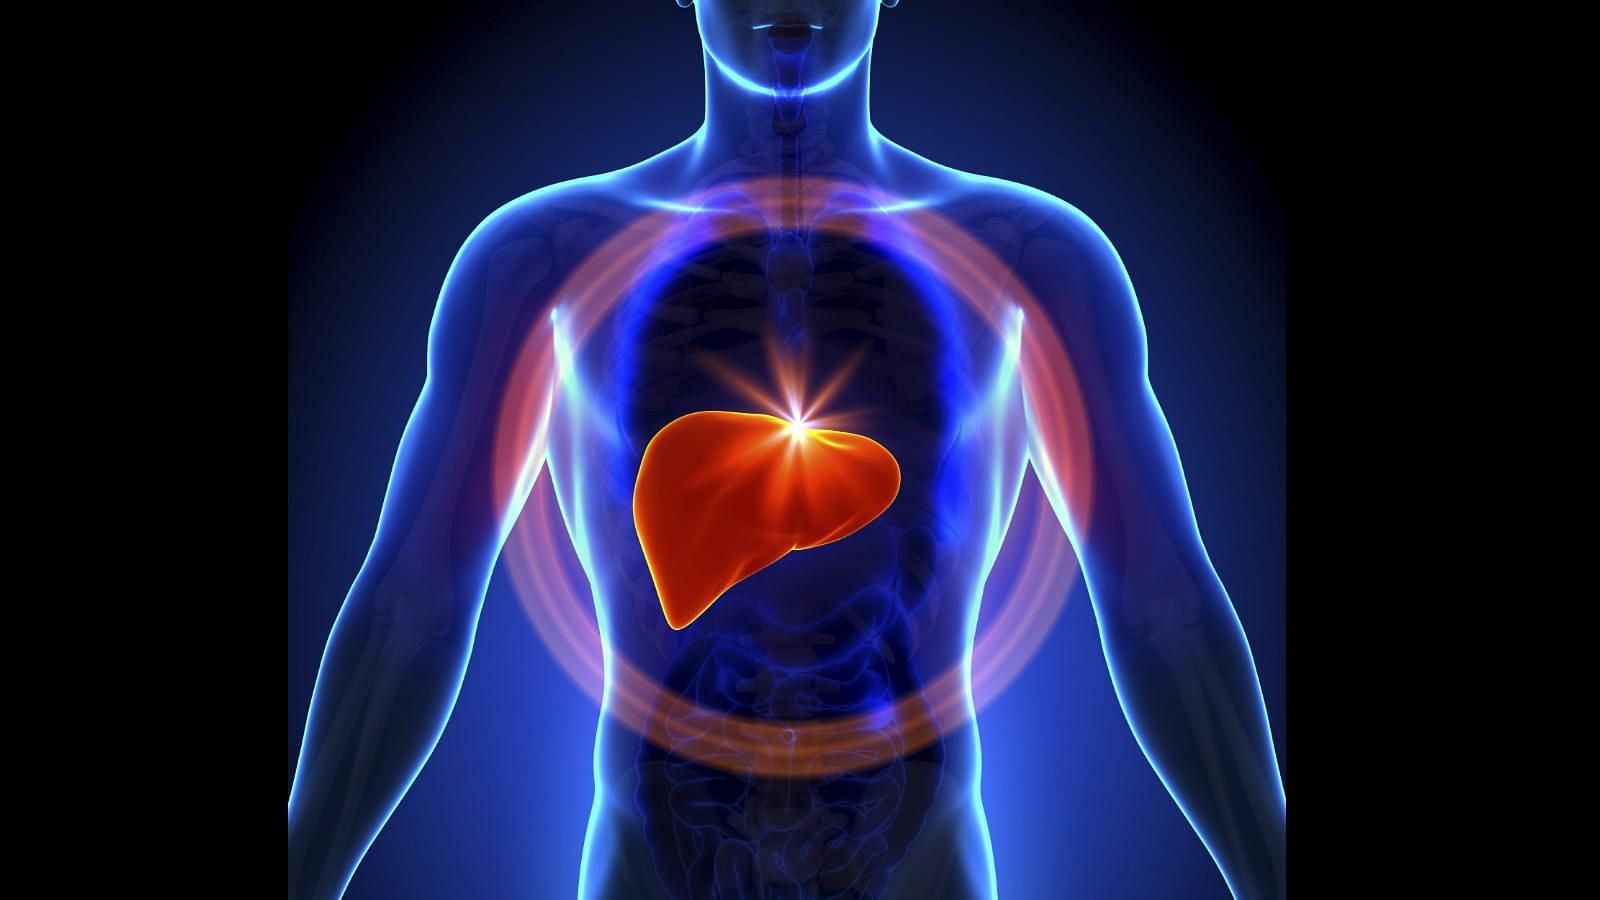 Zinc oxide nanoparticles can help prevent fat accumulation in the liver.